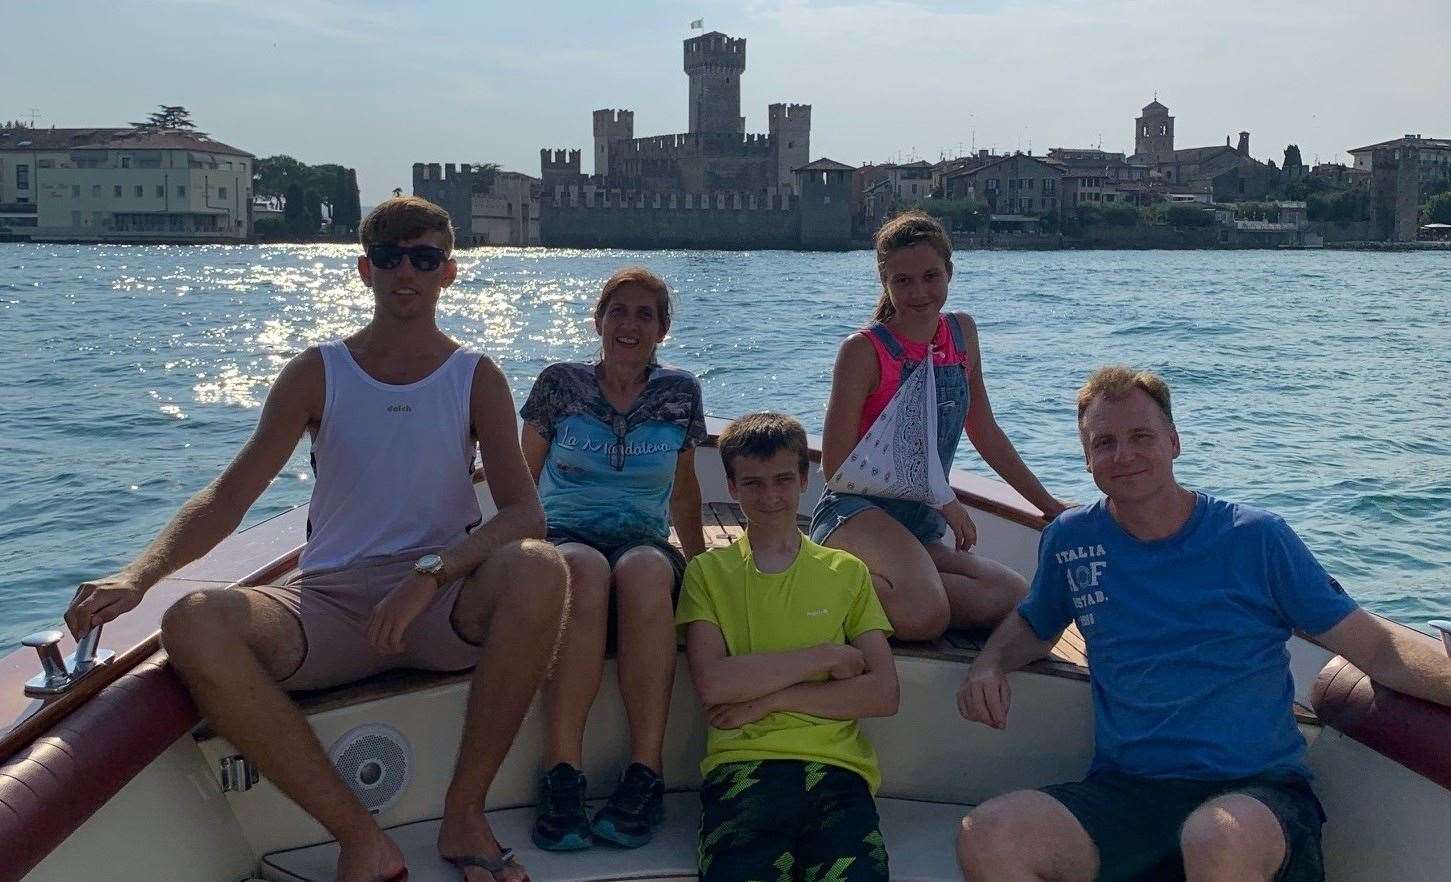 The Marshall family on holiday in Italy. Left to right: George, Paola, Robert, Anna, and Neil.